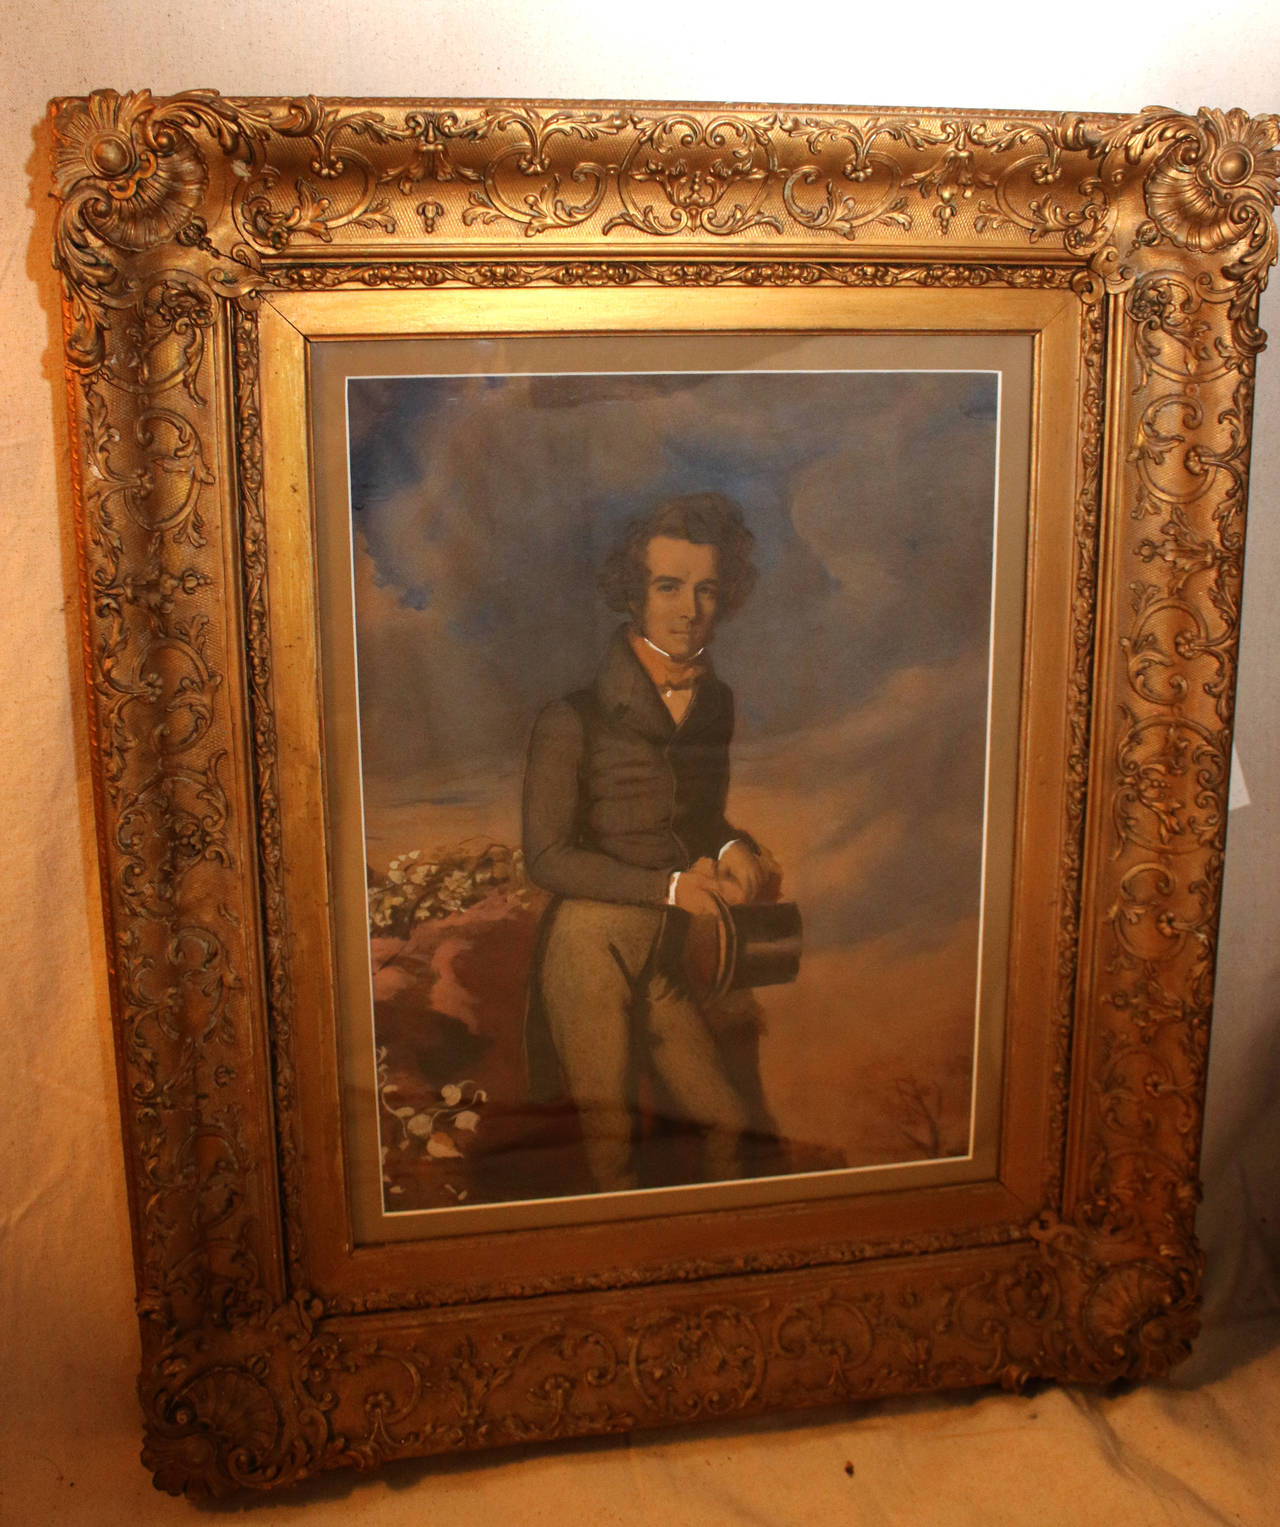 Well executed pastel featuring an English gentleman wearing early 1800s Regency style attire painted against a background of soft pink and blue clouds. Unsigned.
Matted in heavily carved gilded wooden frame. Lots of detail.